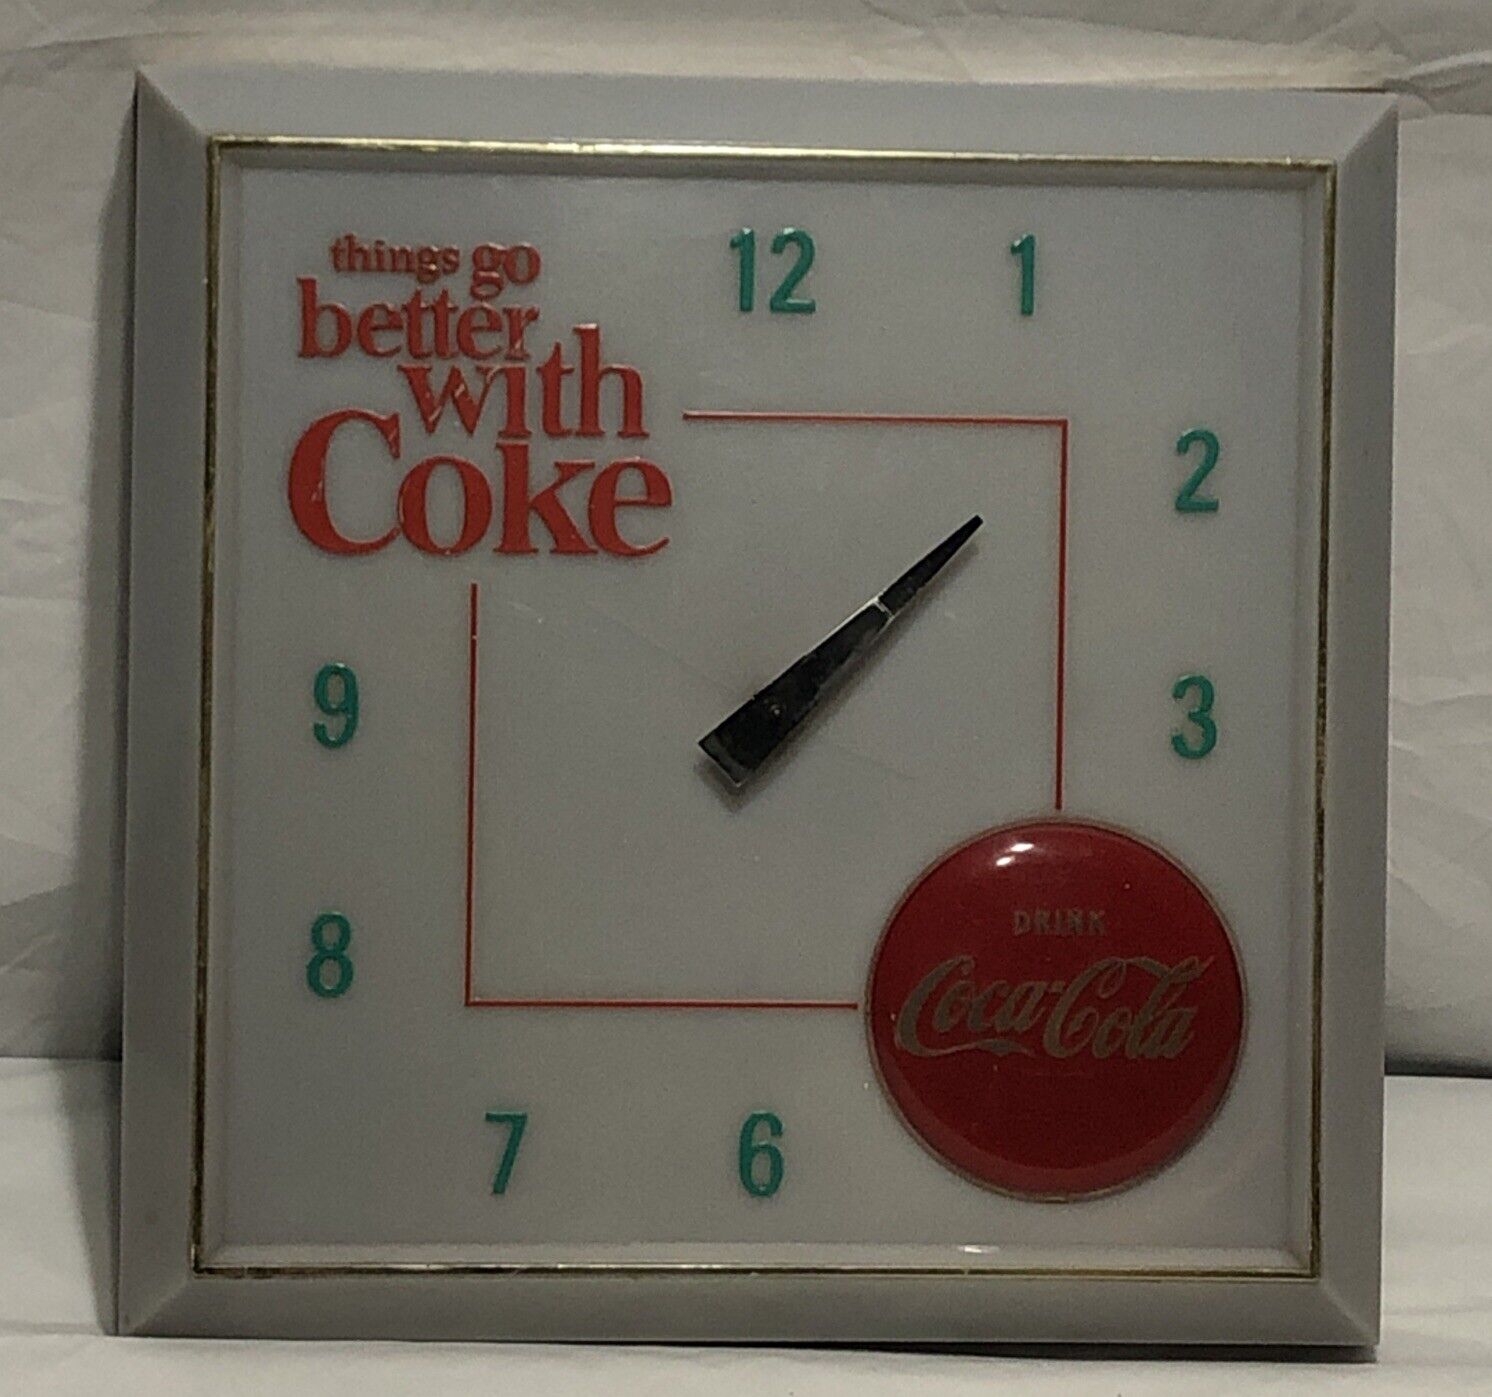 Vintage 1960s Things Go Better With Coke Coca-Cola Hanover Electric Wall Clock